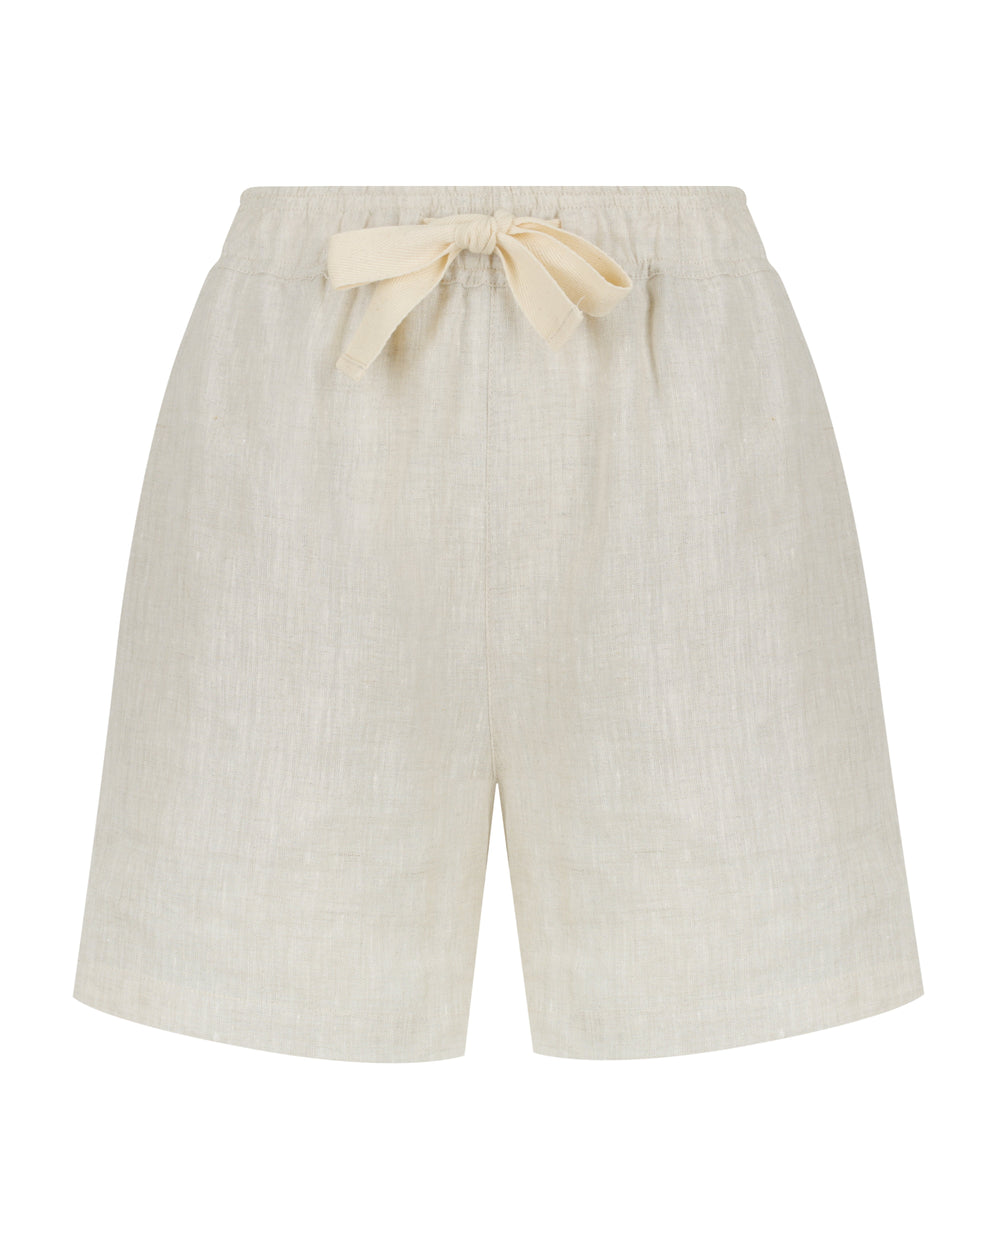 The Relaxed Short